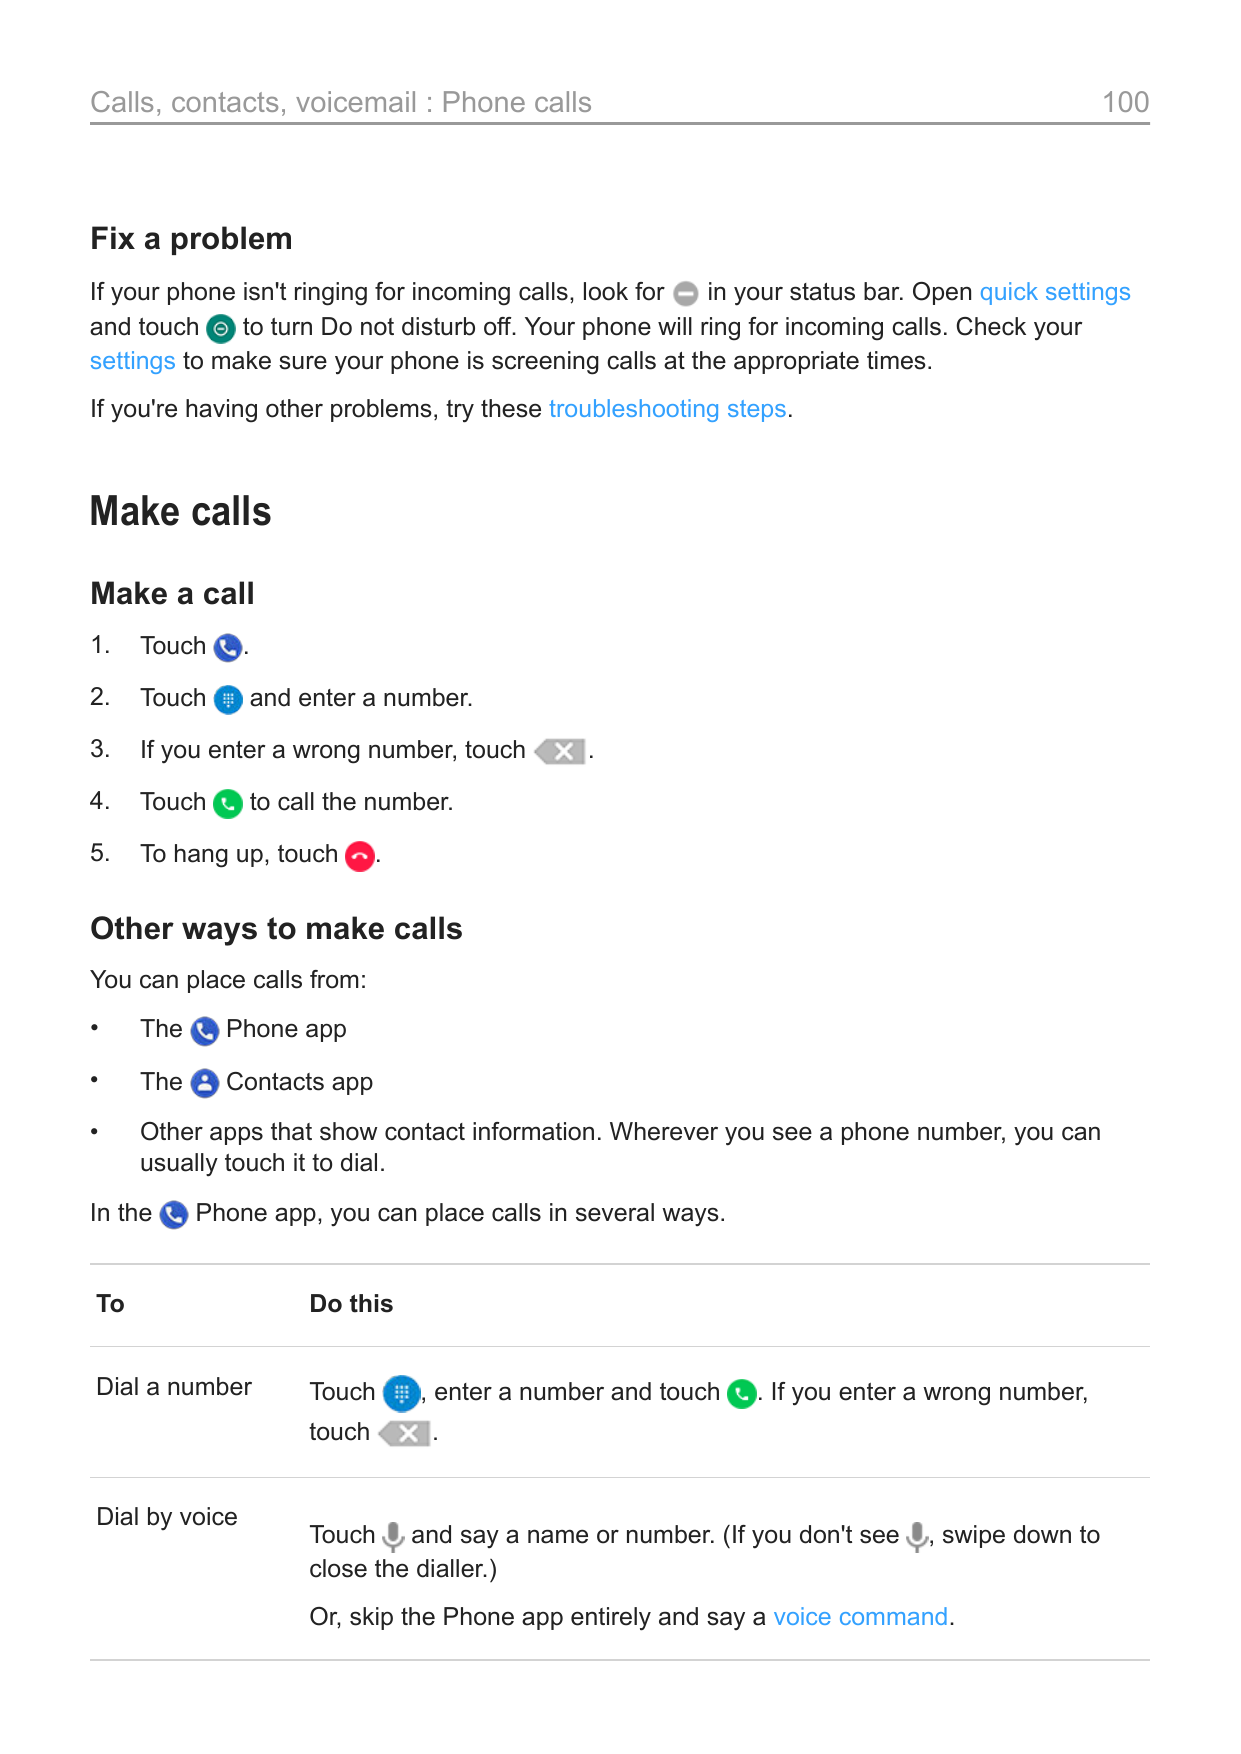 Calls, contacts, voicemail : Phone calls100Fix a problemin your status bar. Open quick settingsIf your phone isn't ringing for i